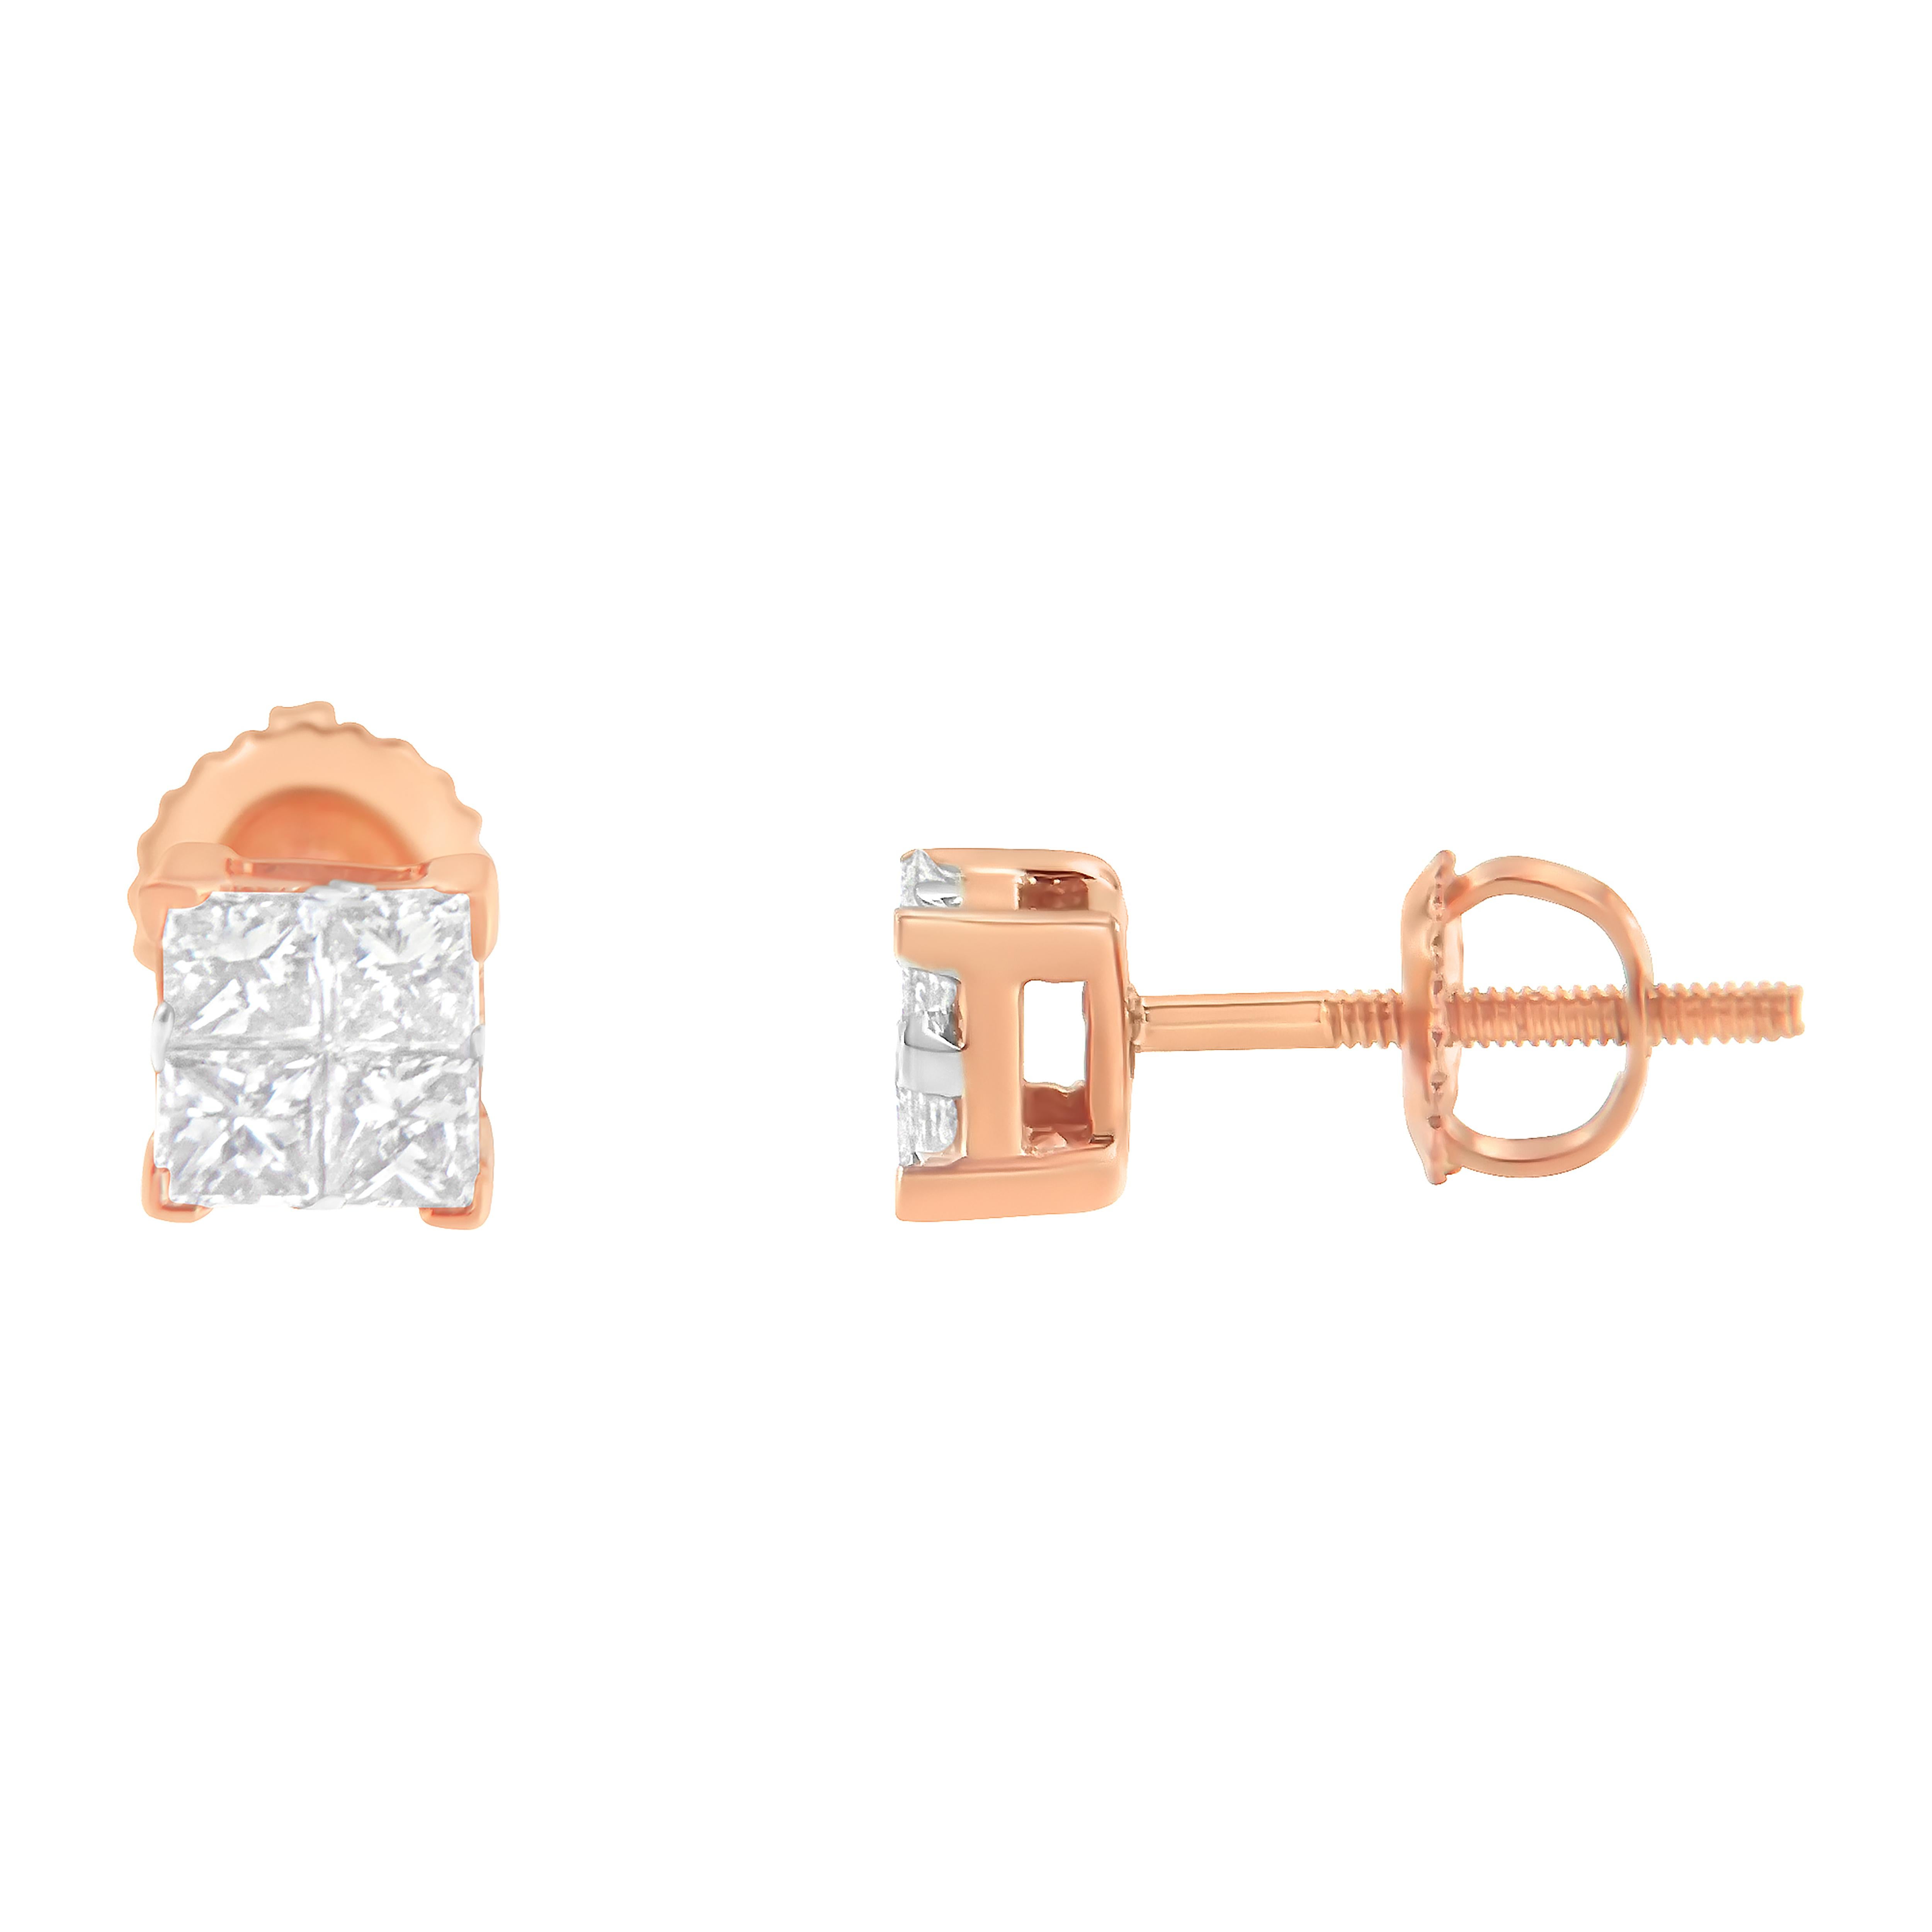 A pair of square stud earrings with a cluster of four princess cut diamonds. These diamonds are set in a composite manner, creating a larger diamond look. Crafted in 10 karat rose gold, they have a total diamond weight of 1/2 carats.

'Video